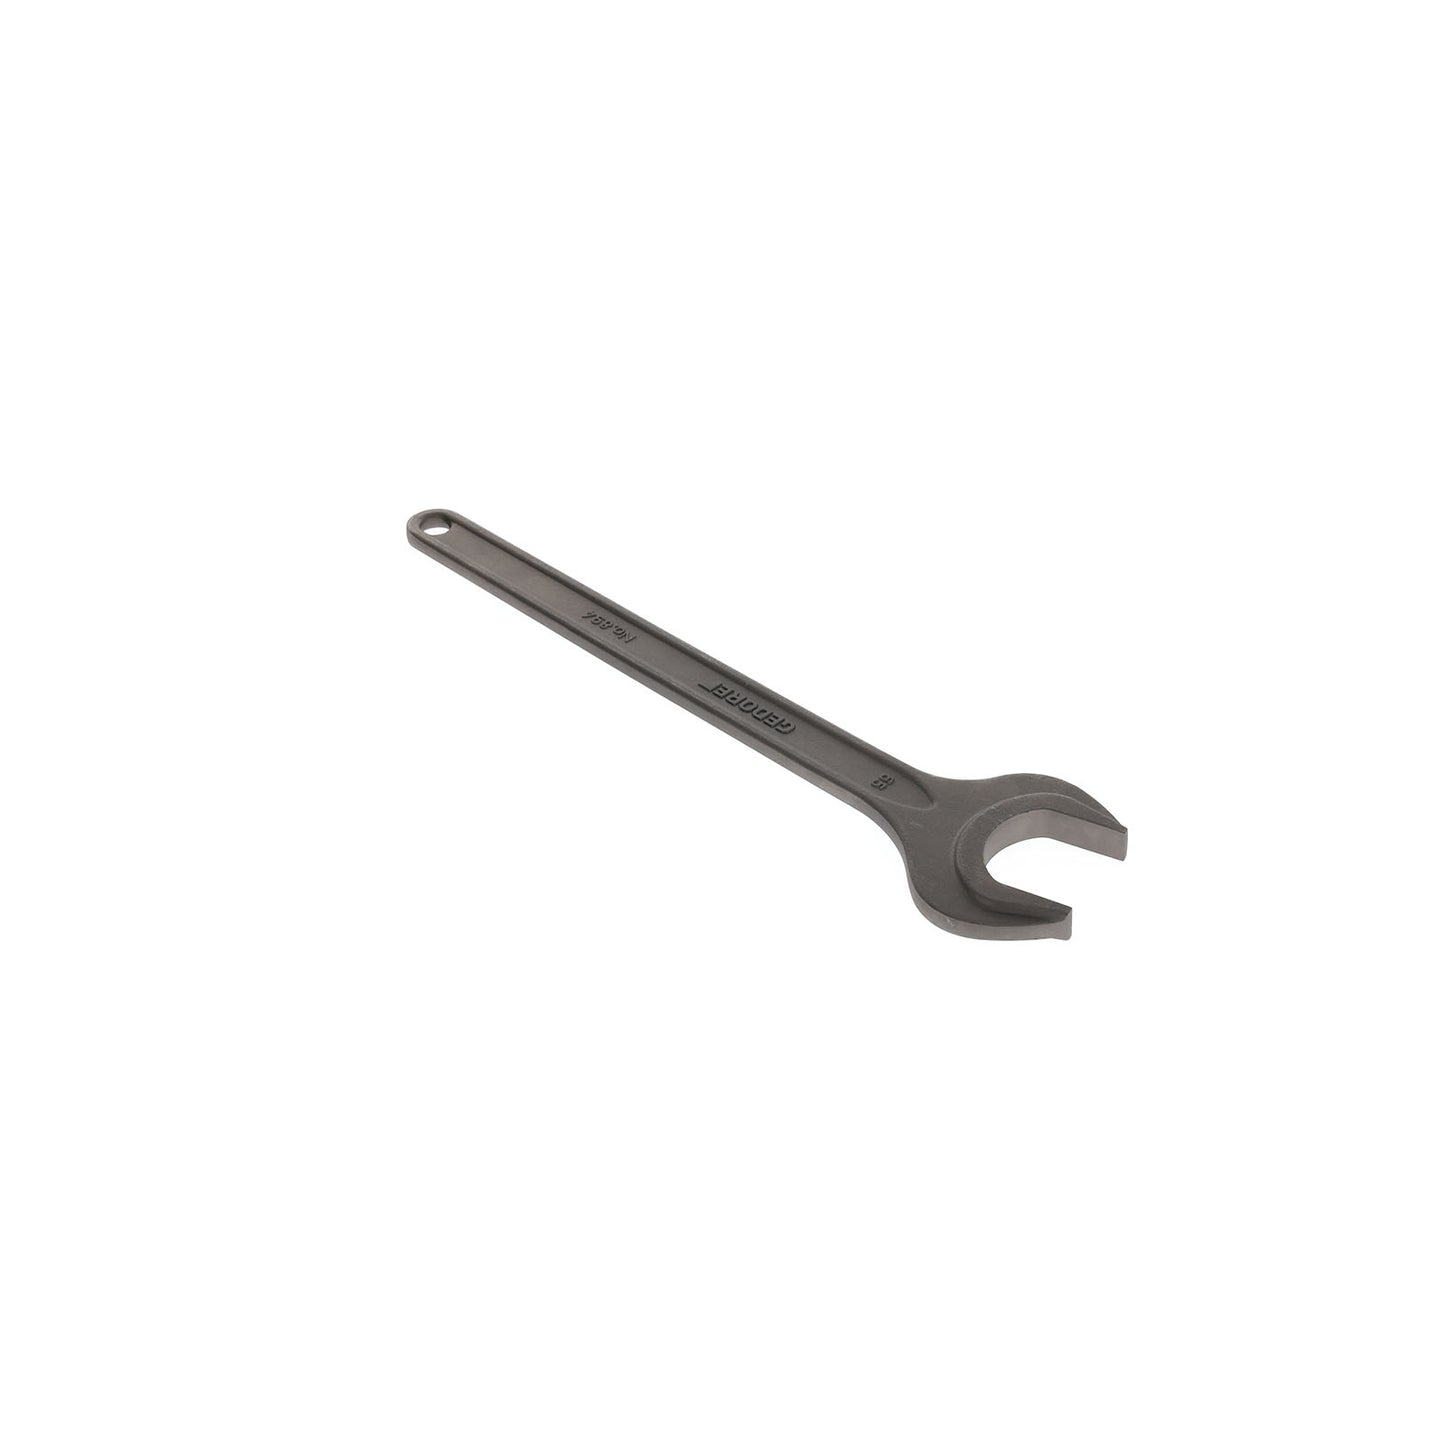 GEDORE 894 65 - 1 Open End Wrench, 65mm (6577430)